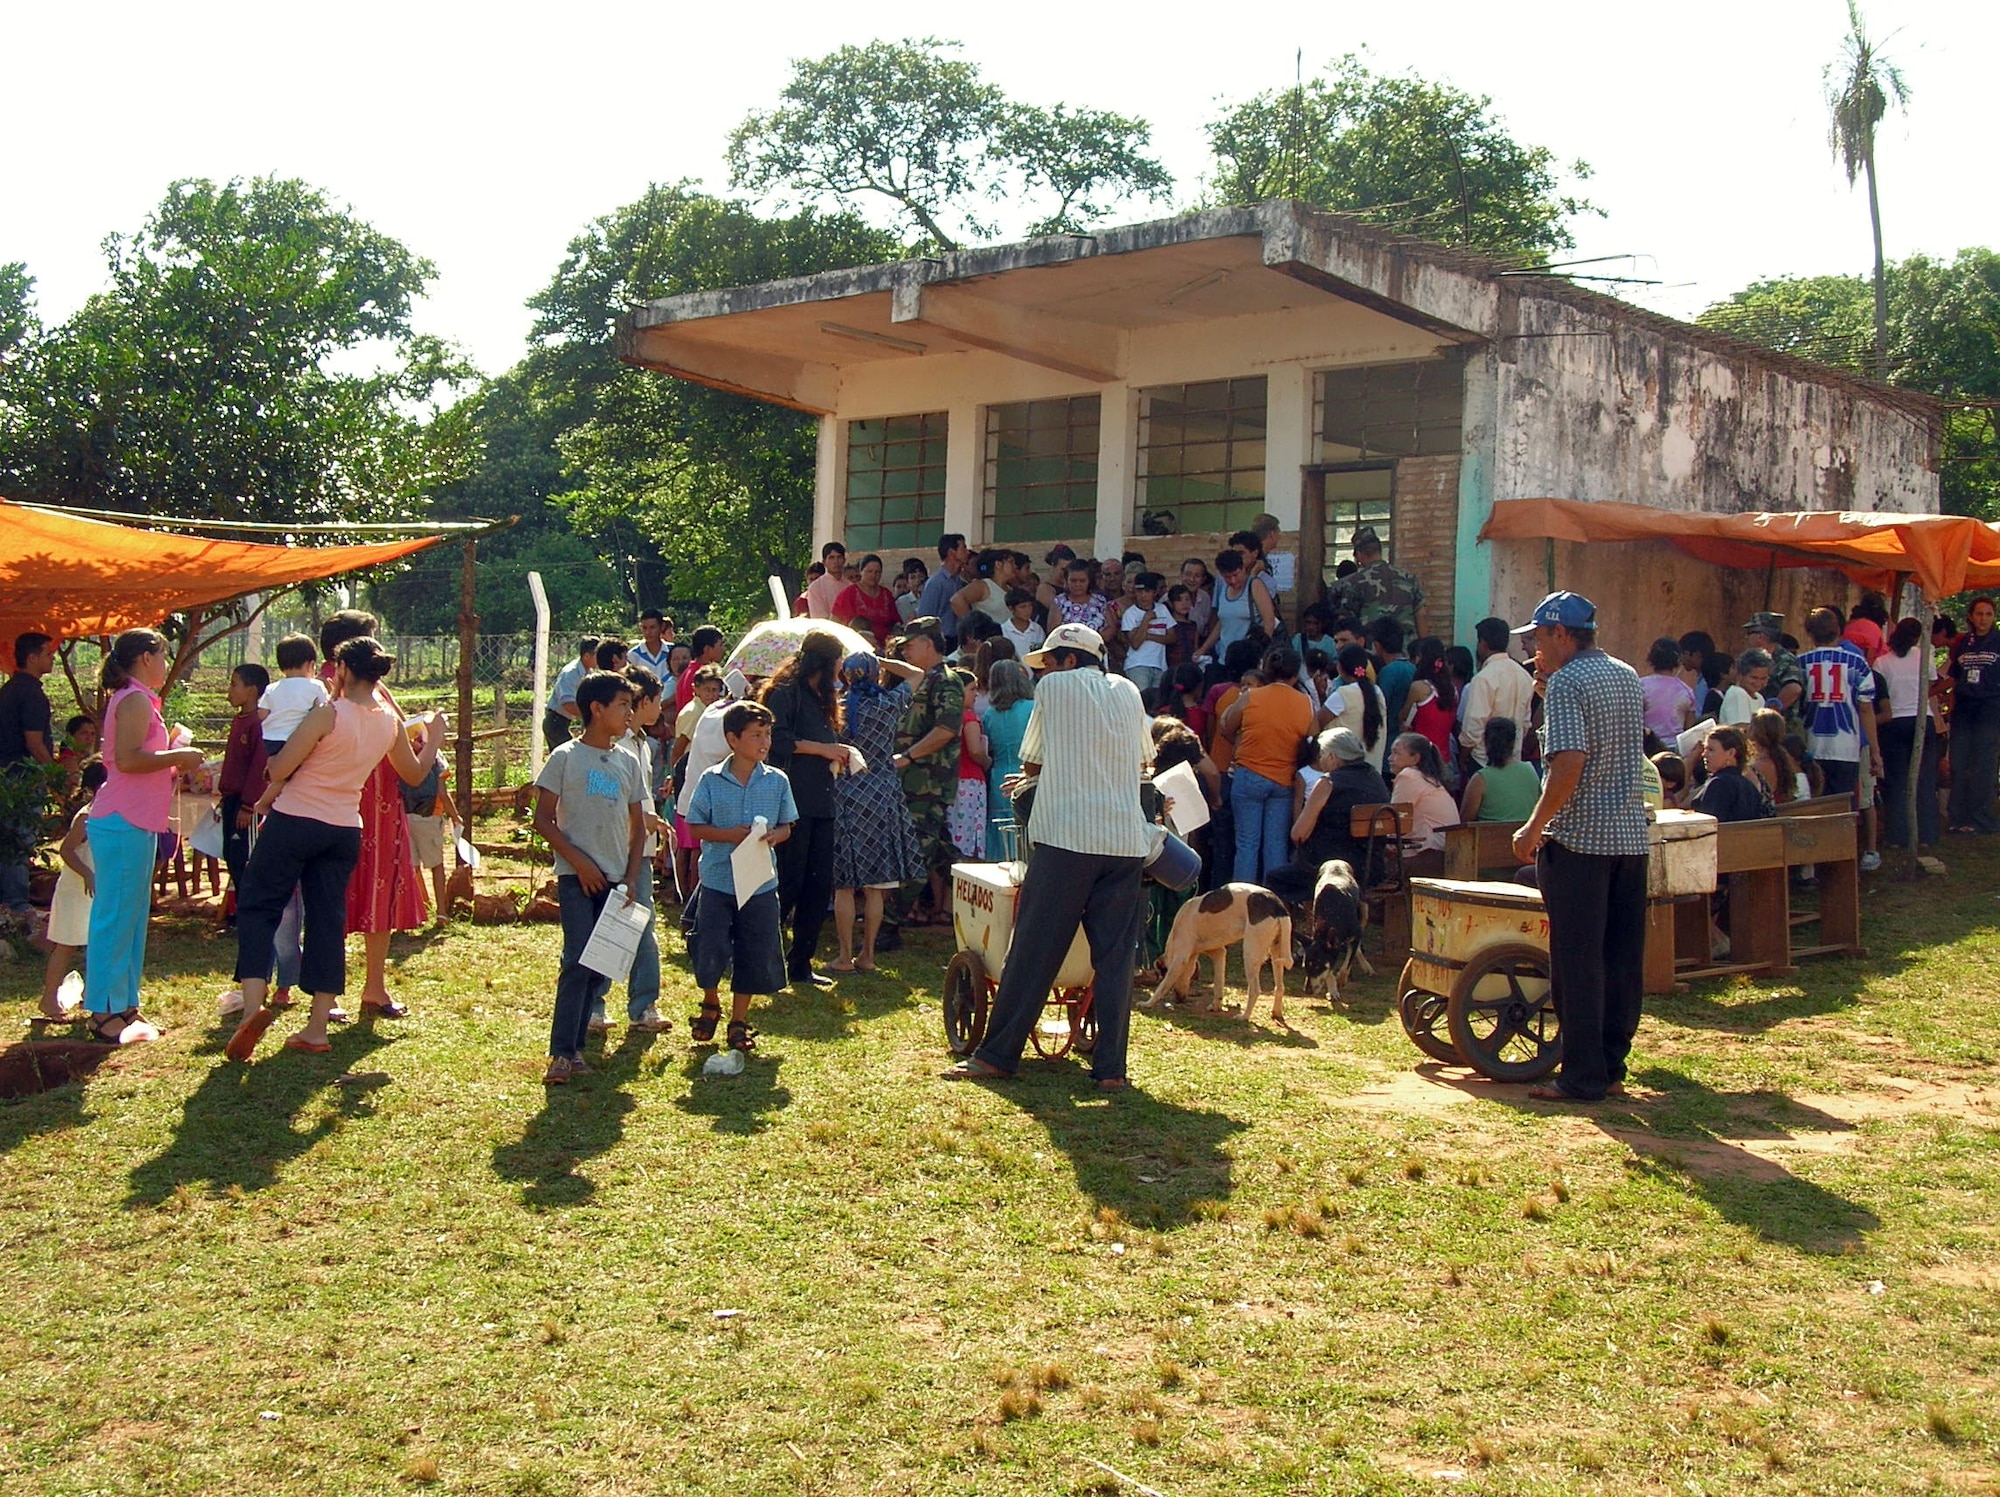 PARAGUAY (AFPN) -- Hundreds of people in a Paraguayan village wait in lines for a chance to be seen by a doctor. The real-world humanitarian aid mission helped several thousand people. Air Force doctors, dentists and optometrists worked with Paraguayan doctors for this mission. Ten members of the 9th Medical Group at Beale Air Force Base, Calif., recently returned from Paraguay after participating in a 15-day medical readiness training exercise.  (U.S. Air Force photo by Lt. Col. Marc Robins)